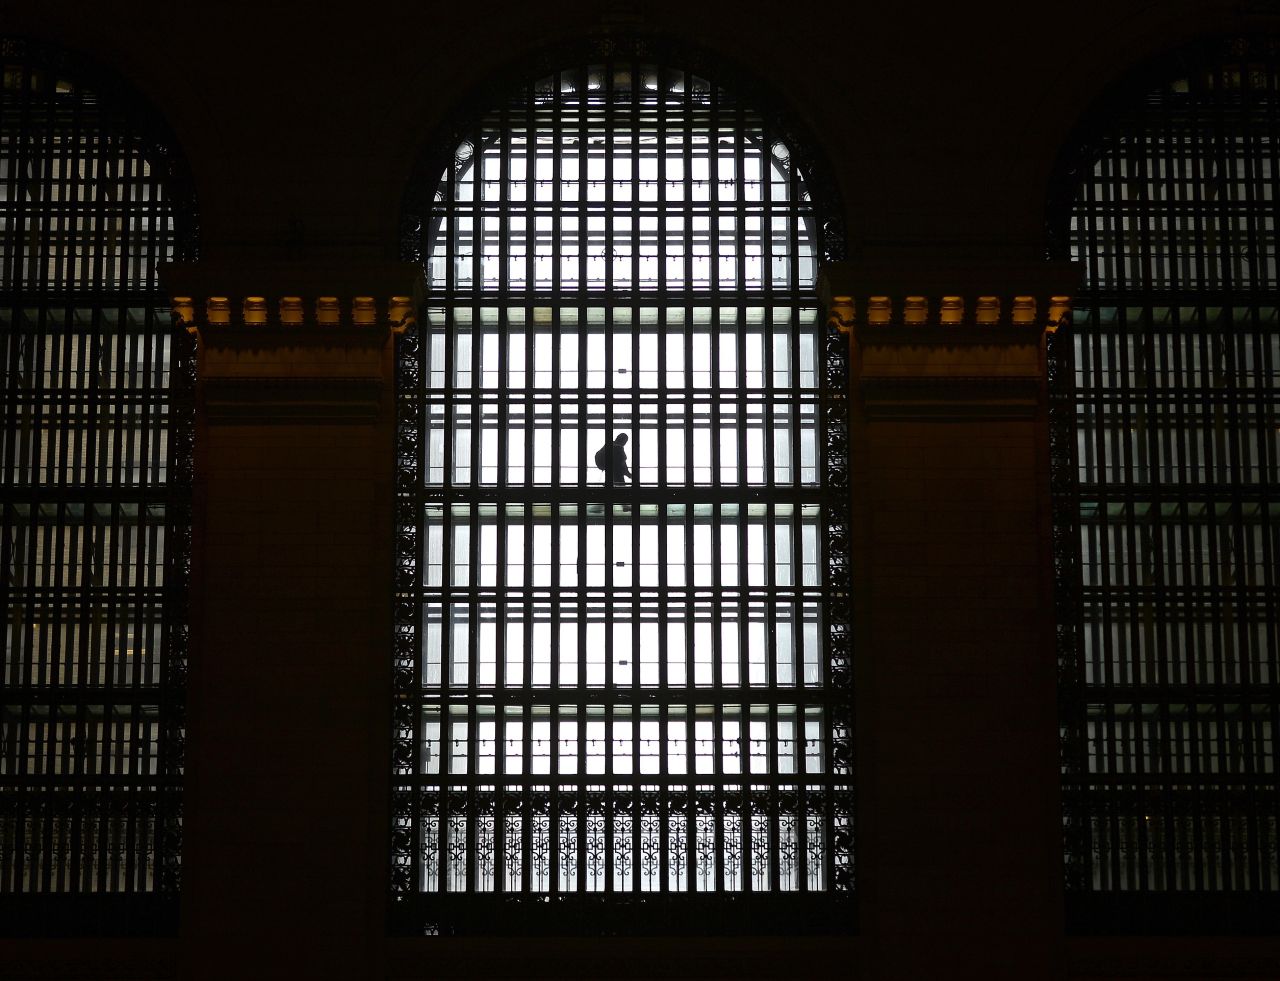 A man walks through one of the  huge arched glass windows at either end of Grand Central Terminal in New York City, a walkway for Metro North and GCT employees,  June 17, 2014.   AFP PHOTO / Timothy A. CLARY        (Photo credit should read TIMOTHY A. CLARY/AFP/Getty Images)